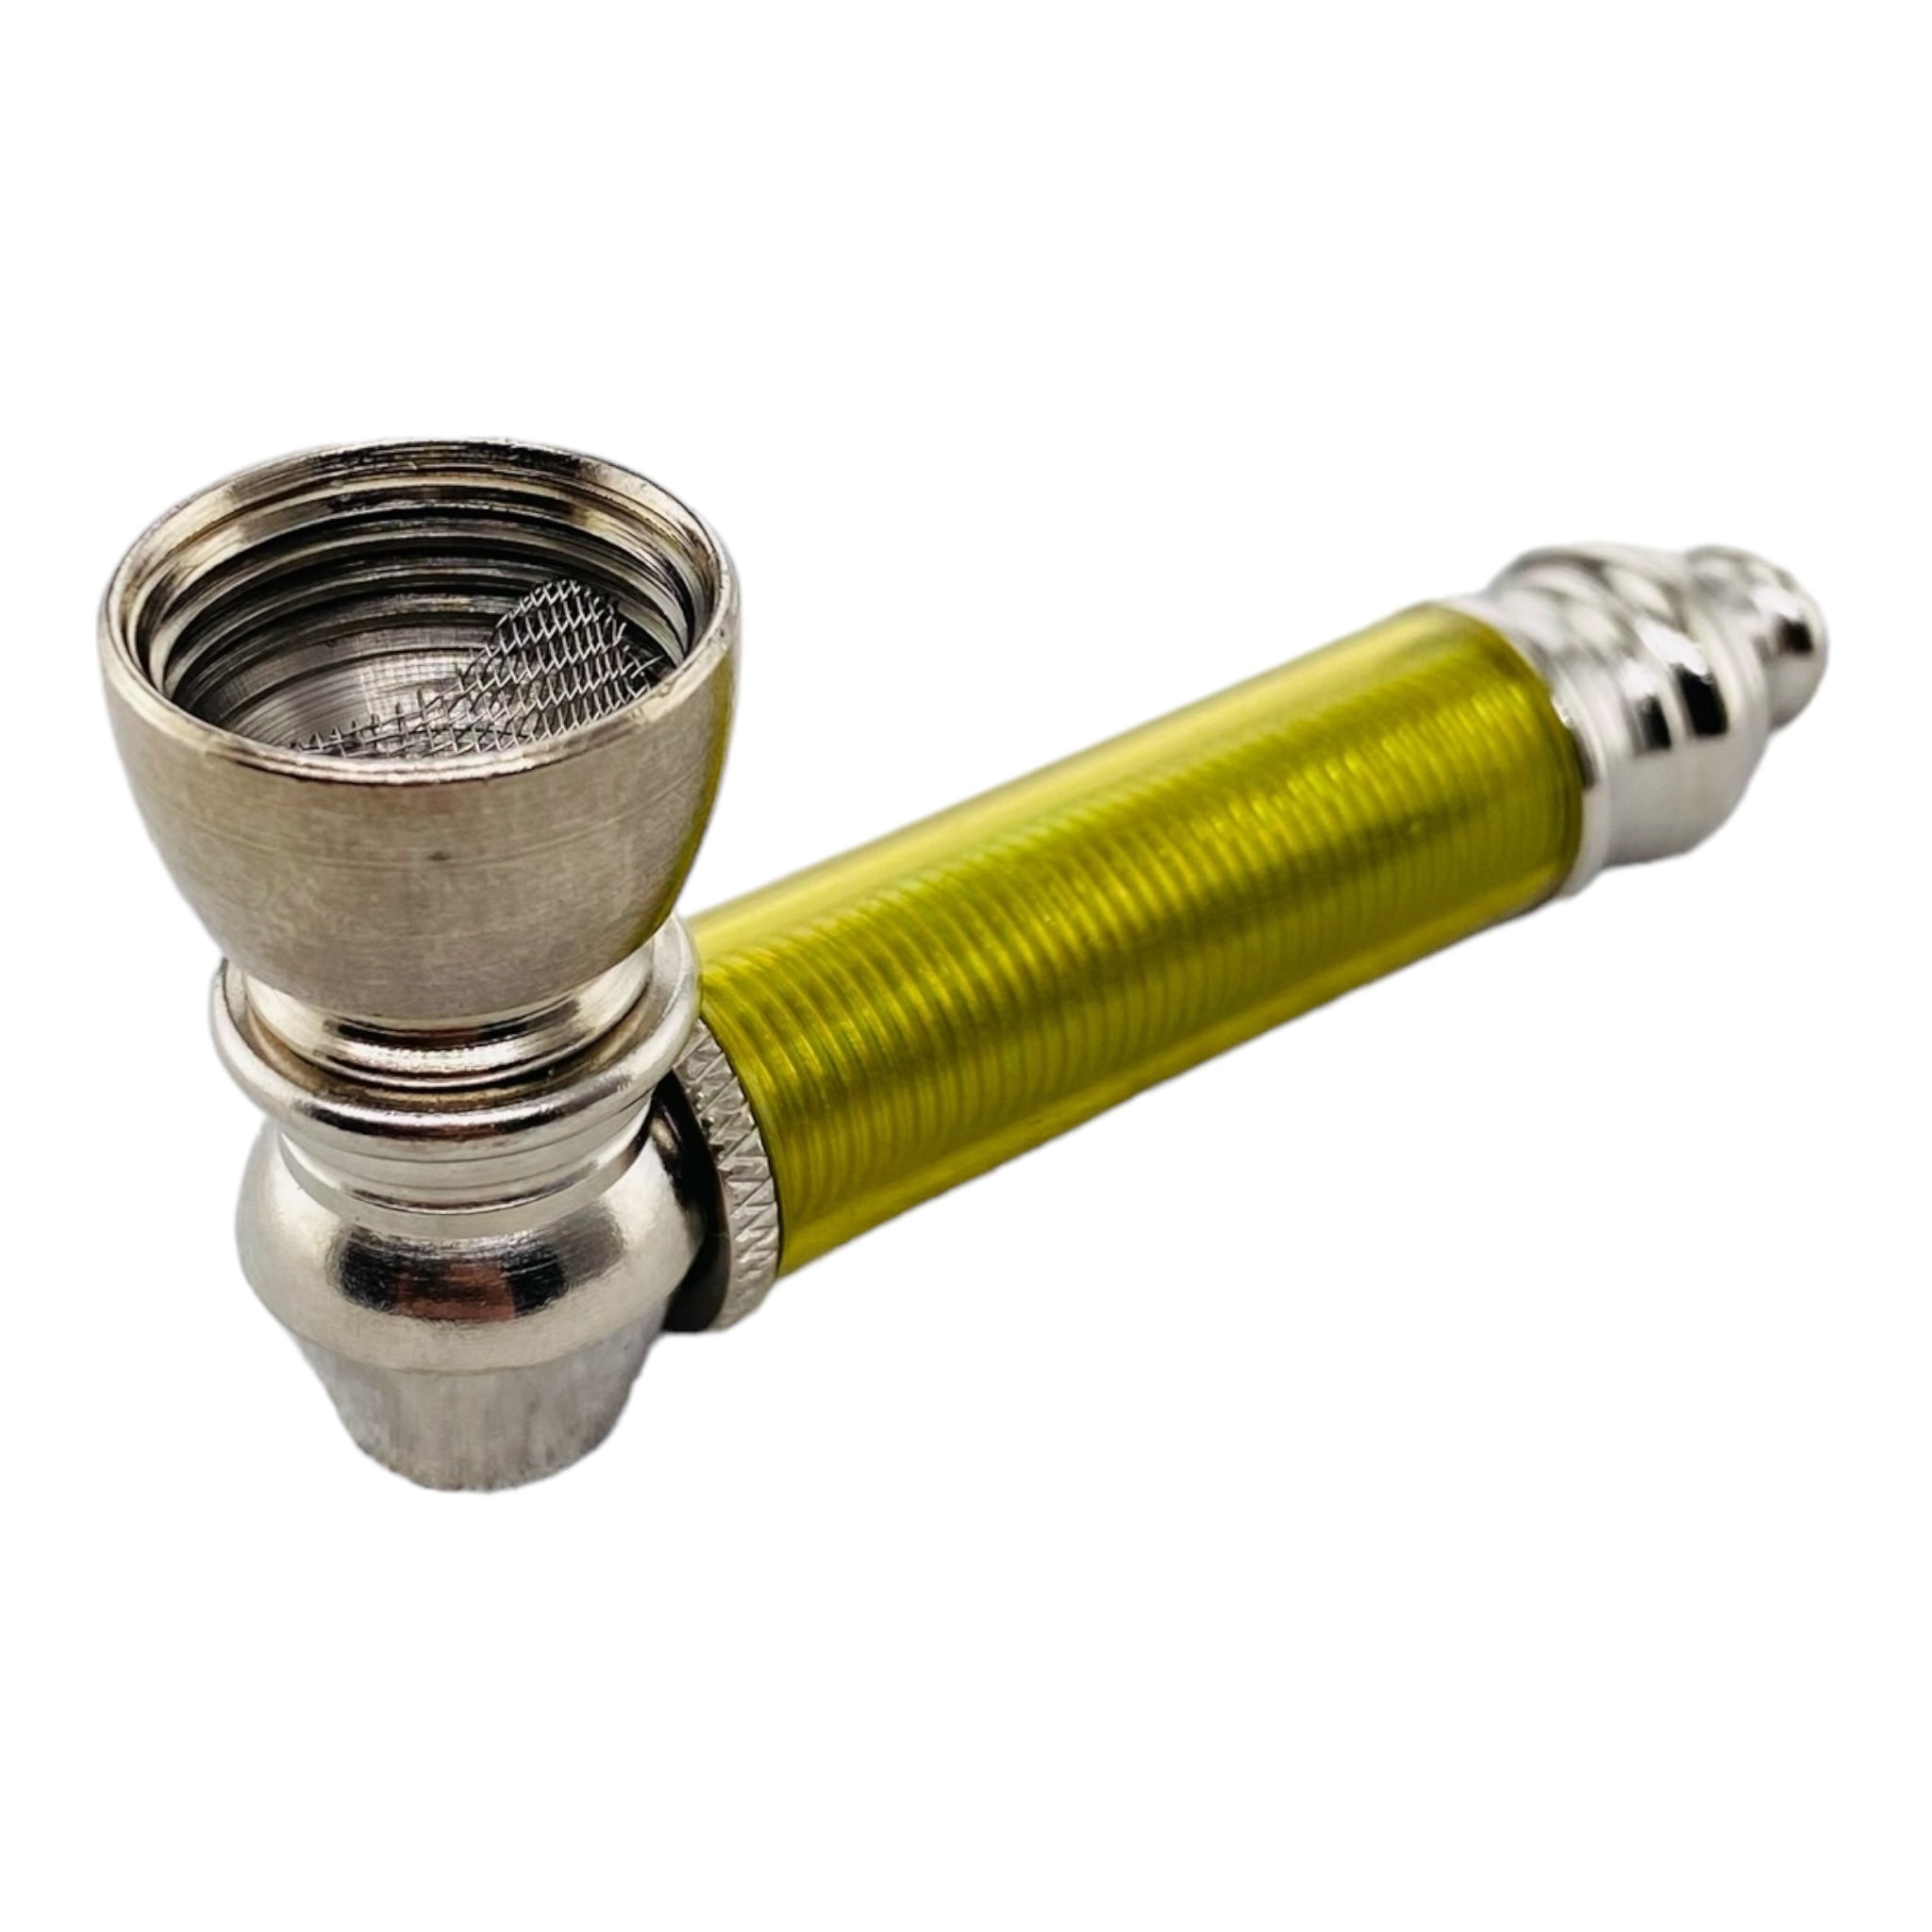 Metal Hand Pipes - Silver Chrome Hand Pipe With Yellow Plastic Stem